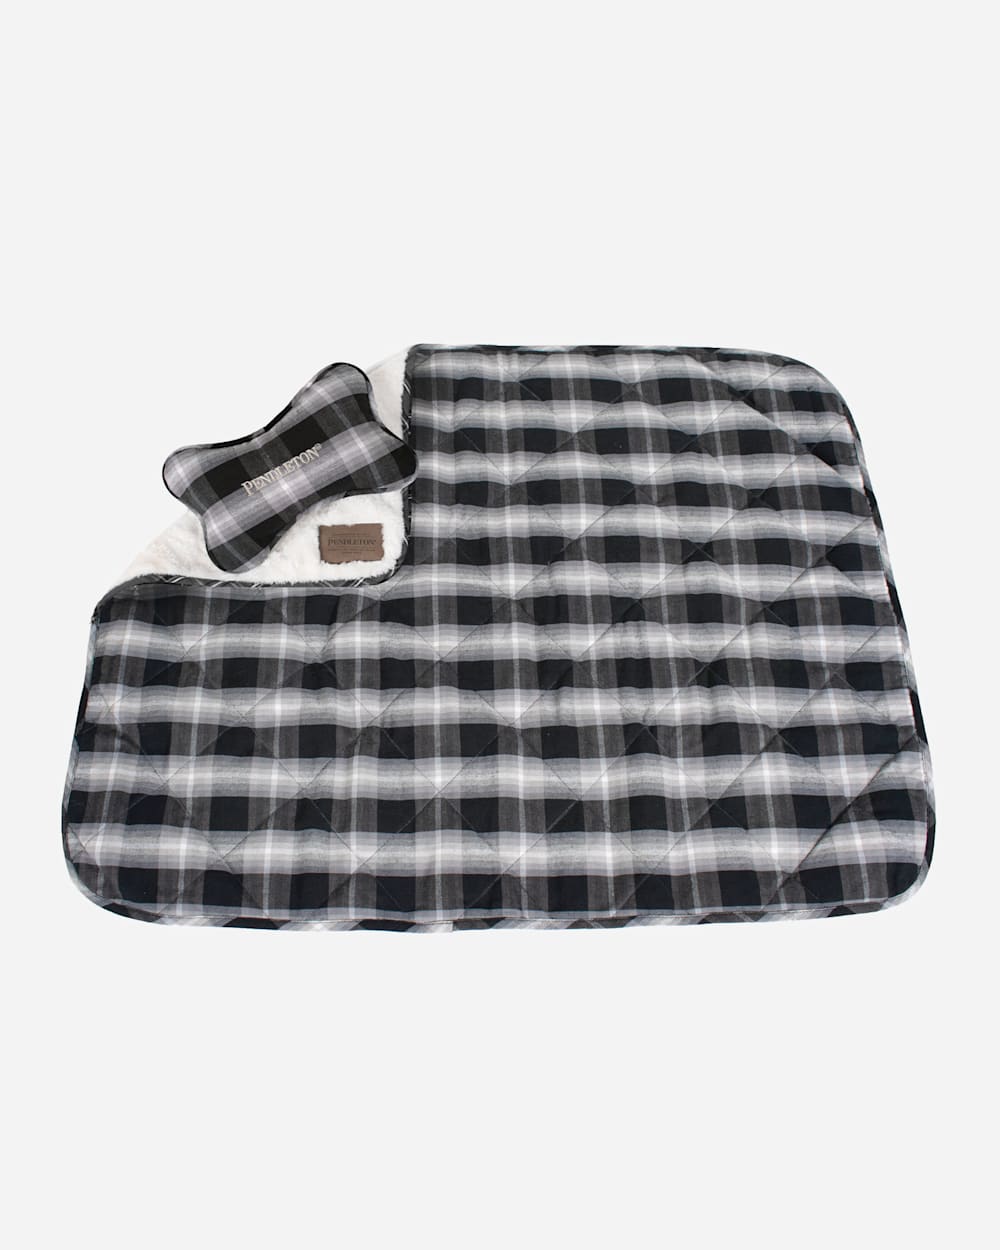 ALTERNATE VIEW OF CLASSIC PLAID THROW AND TOY IN CHARCOAL OMBRE PLAID image number 2